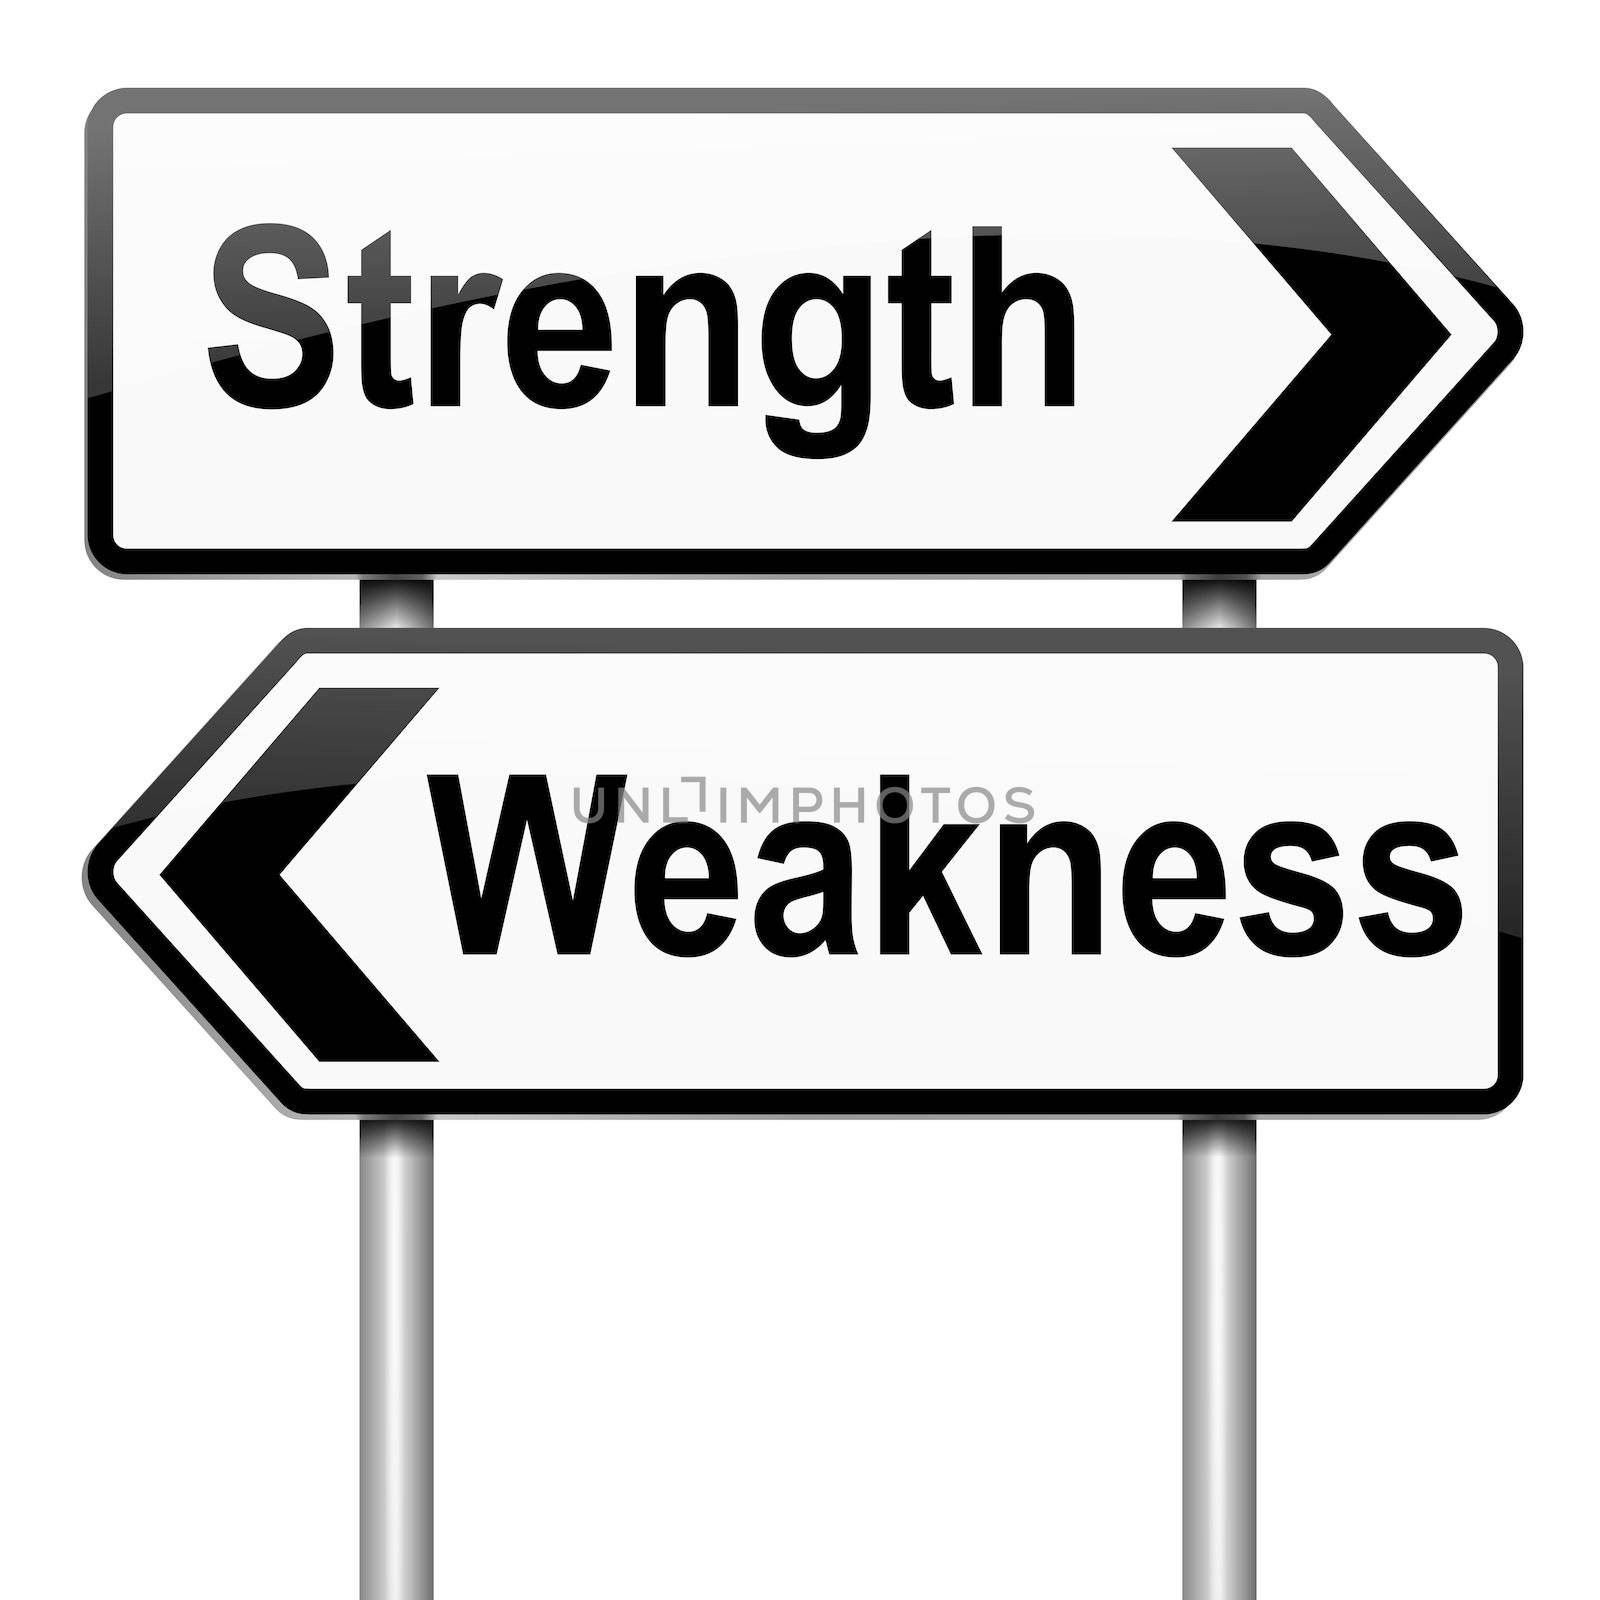 Illustration depicting a roadsign with a strength and weakness concept. White background.